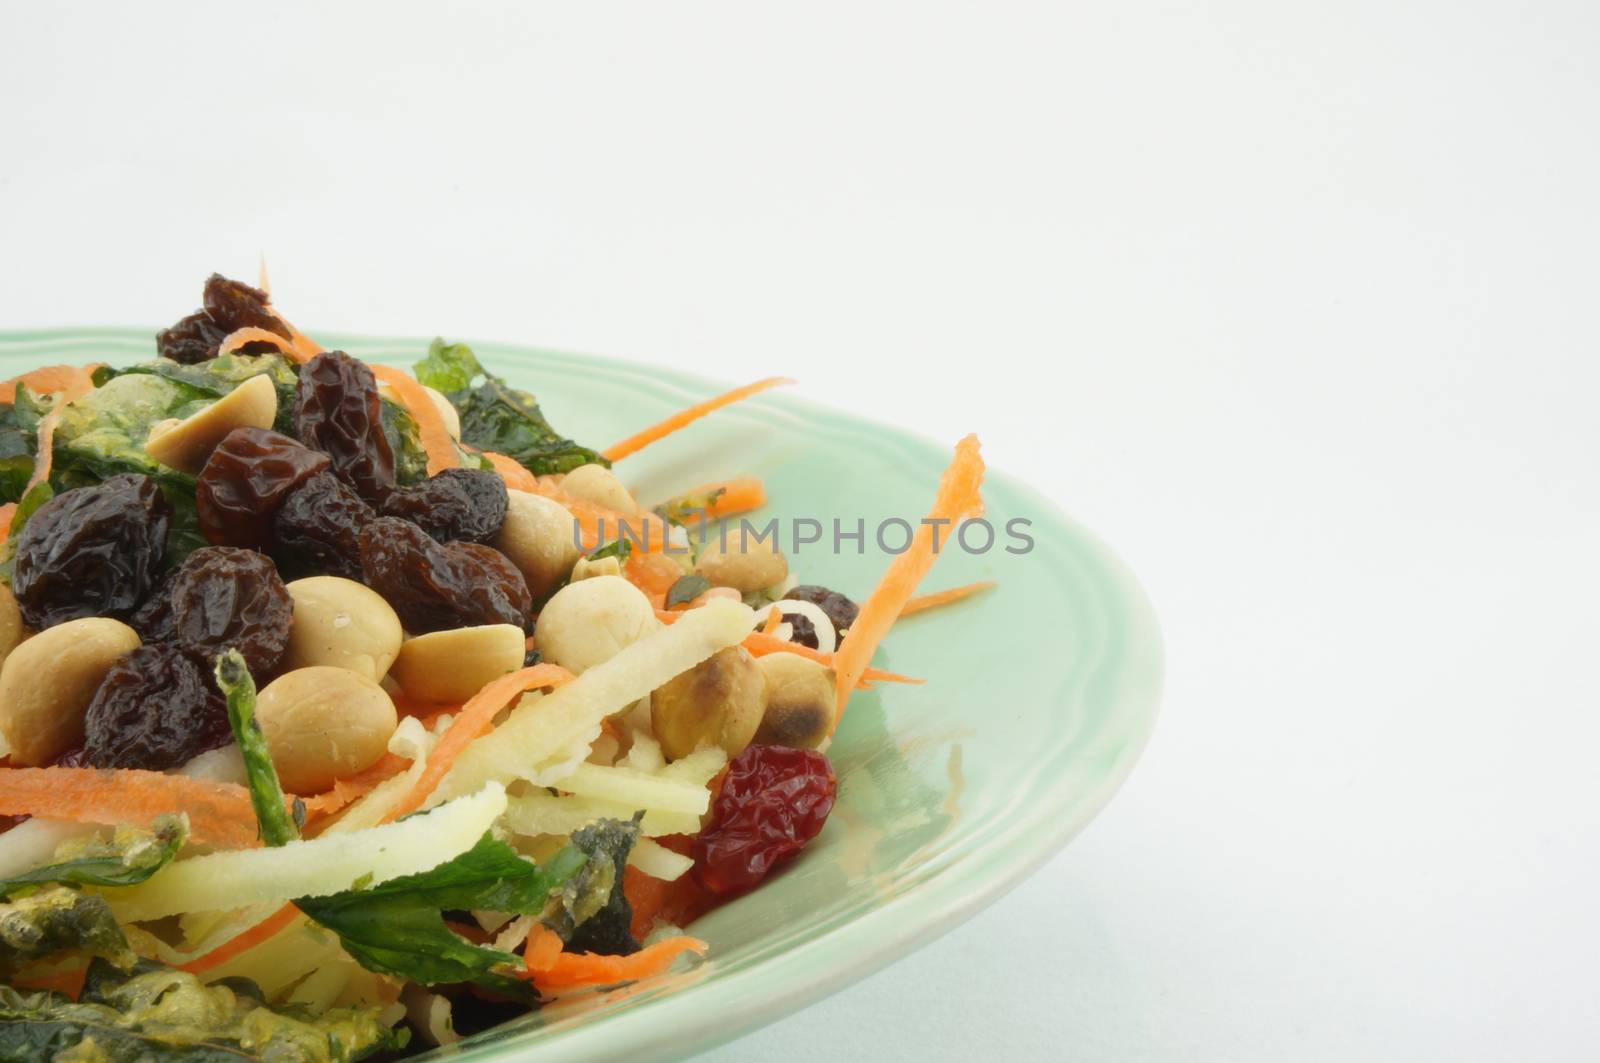 Salad with tomato raisins mango and nut by eaglesky